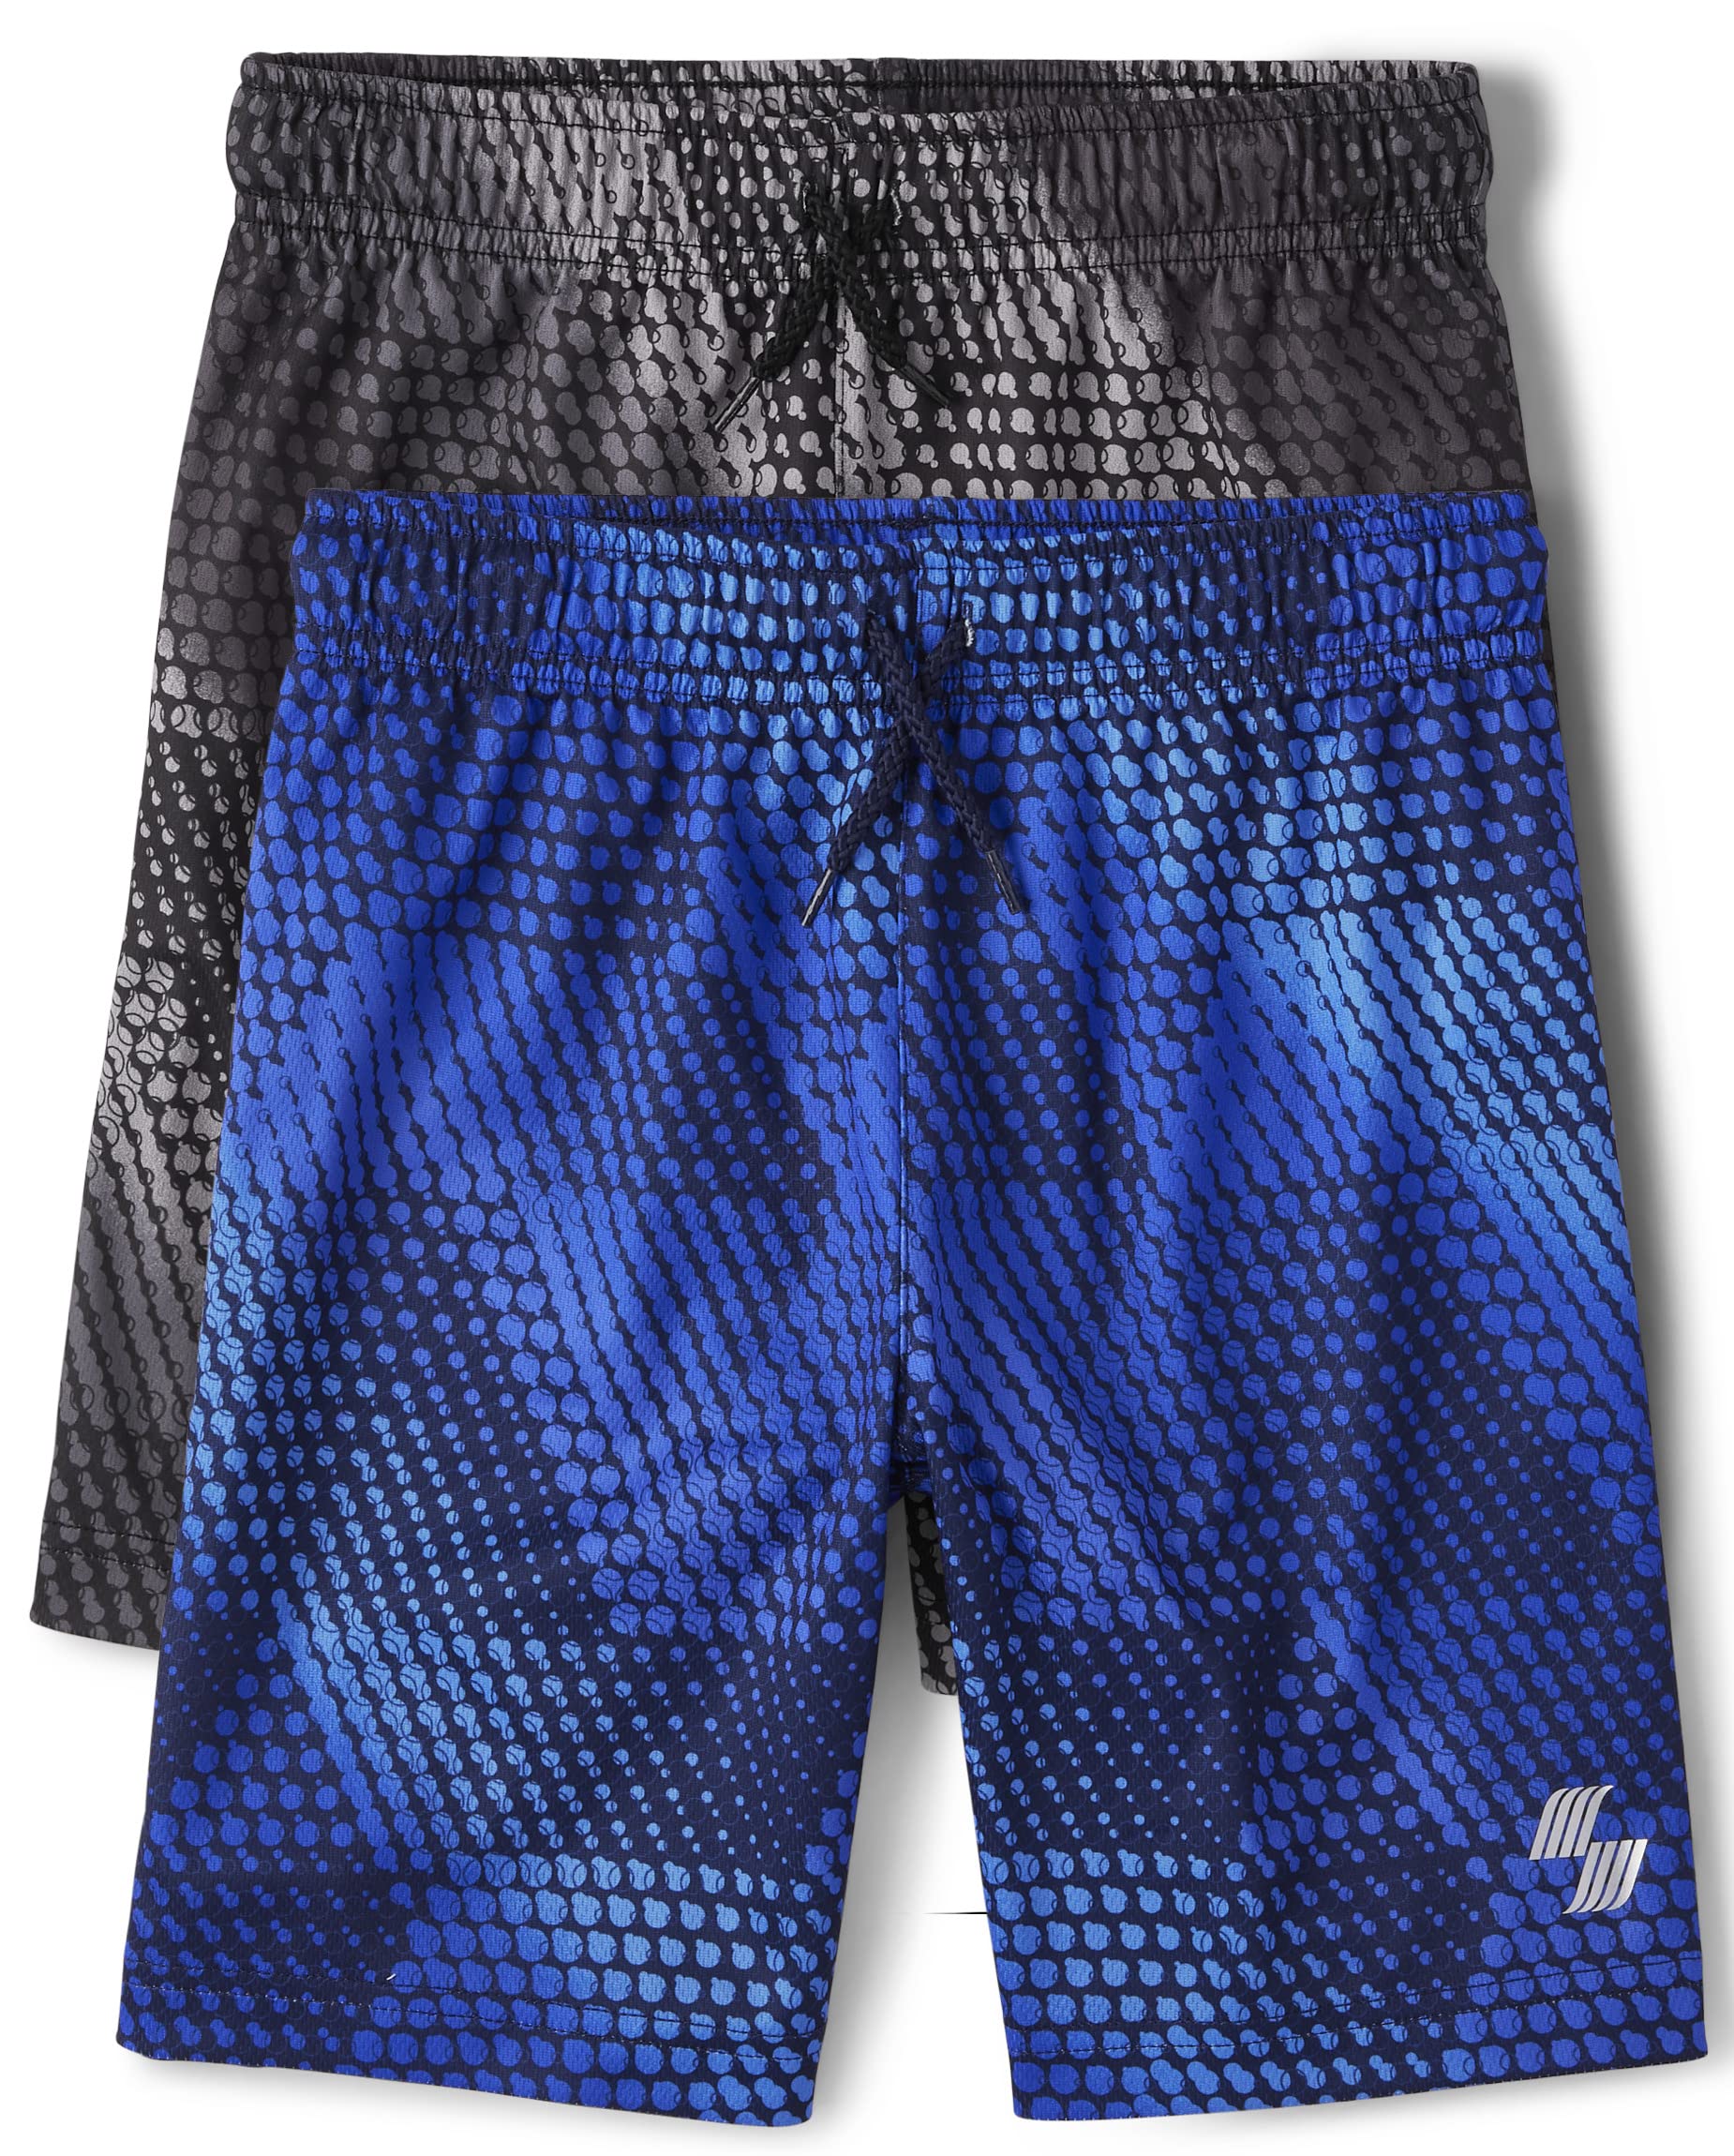 The Children's Place Boys' Basketball Shorts